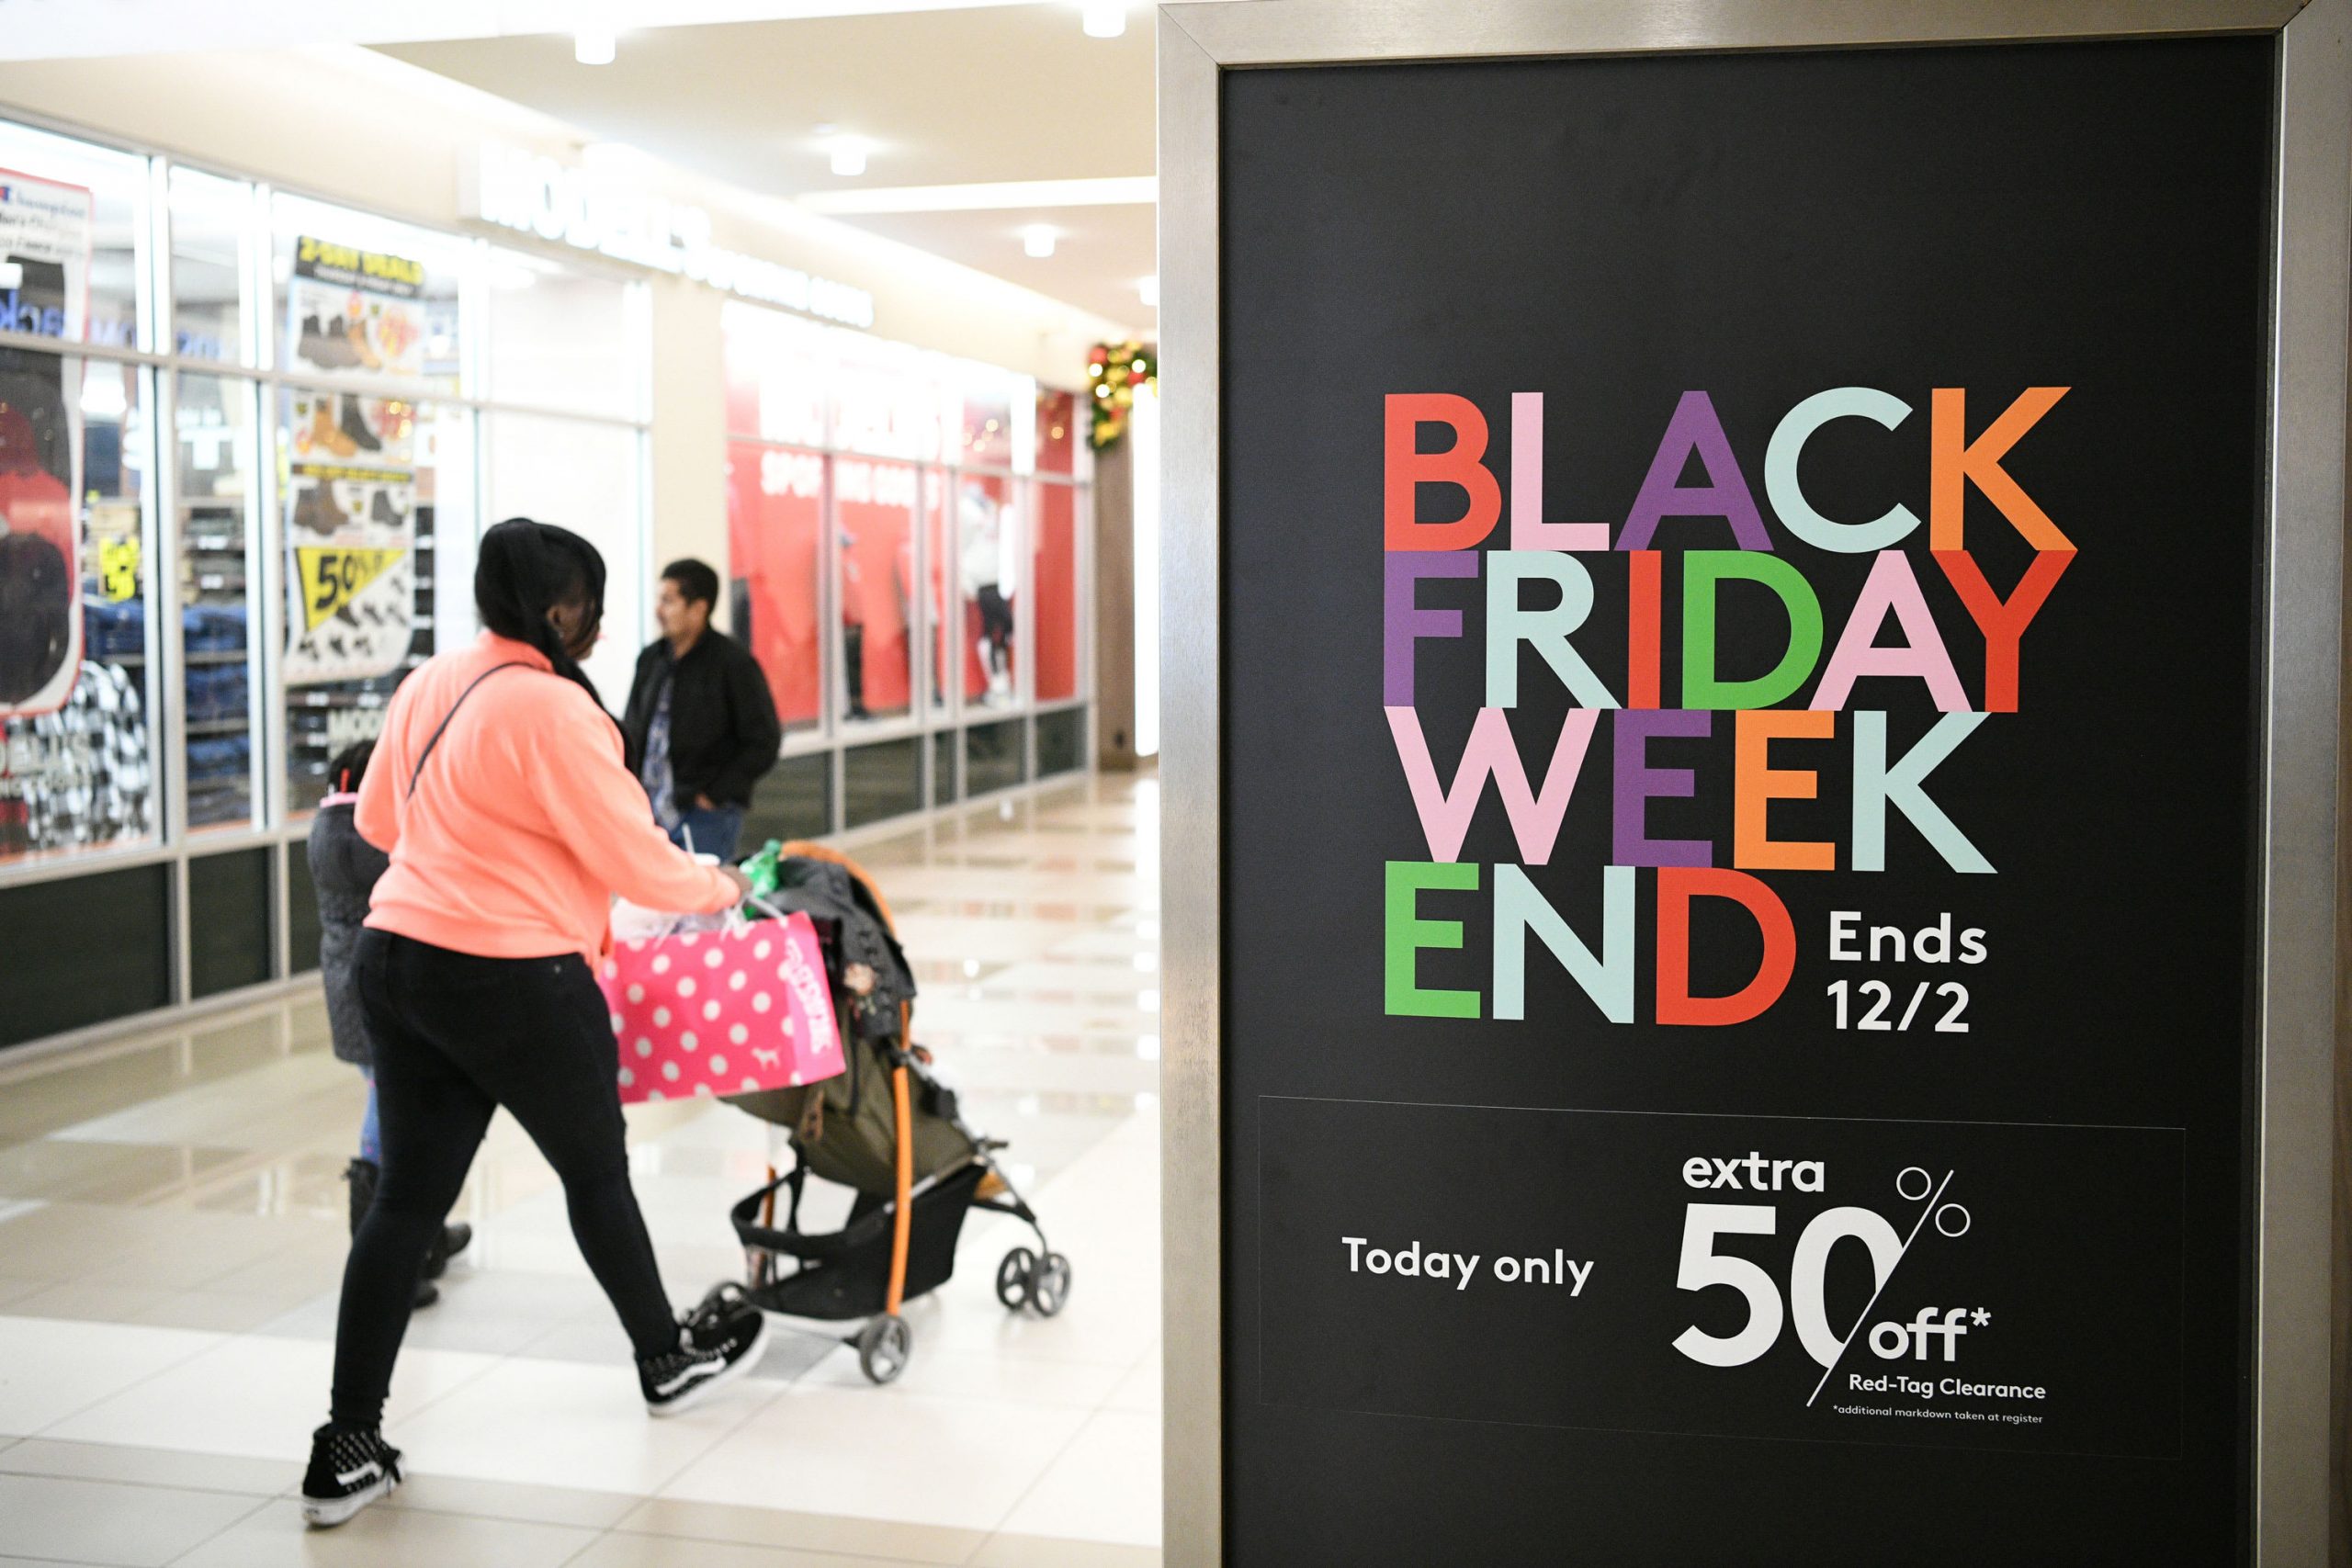 Black Friday might have seen ‘basic change’ because of Covid pandemic